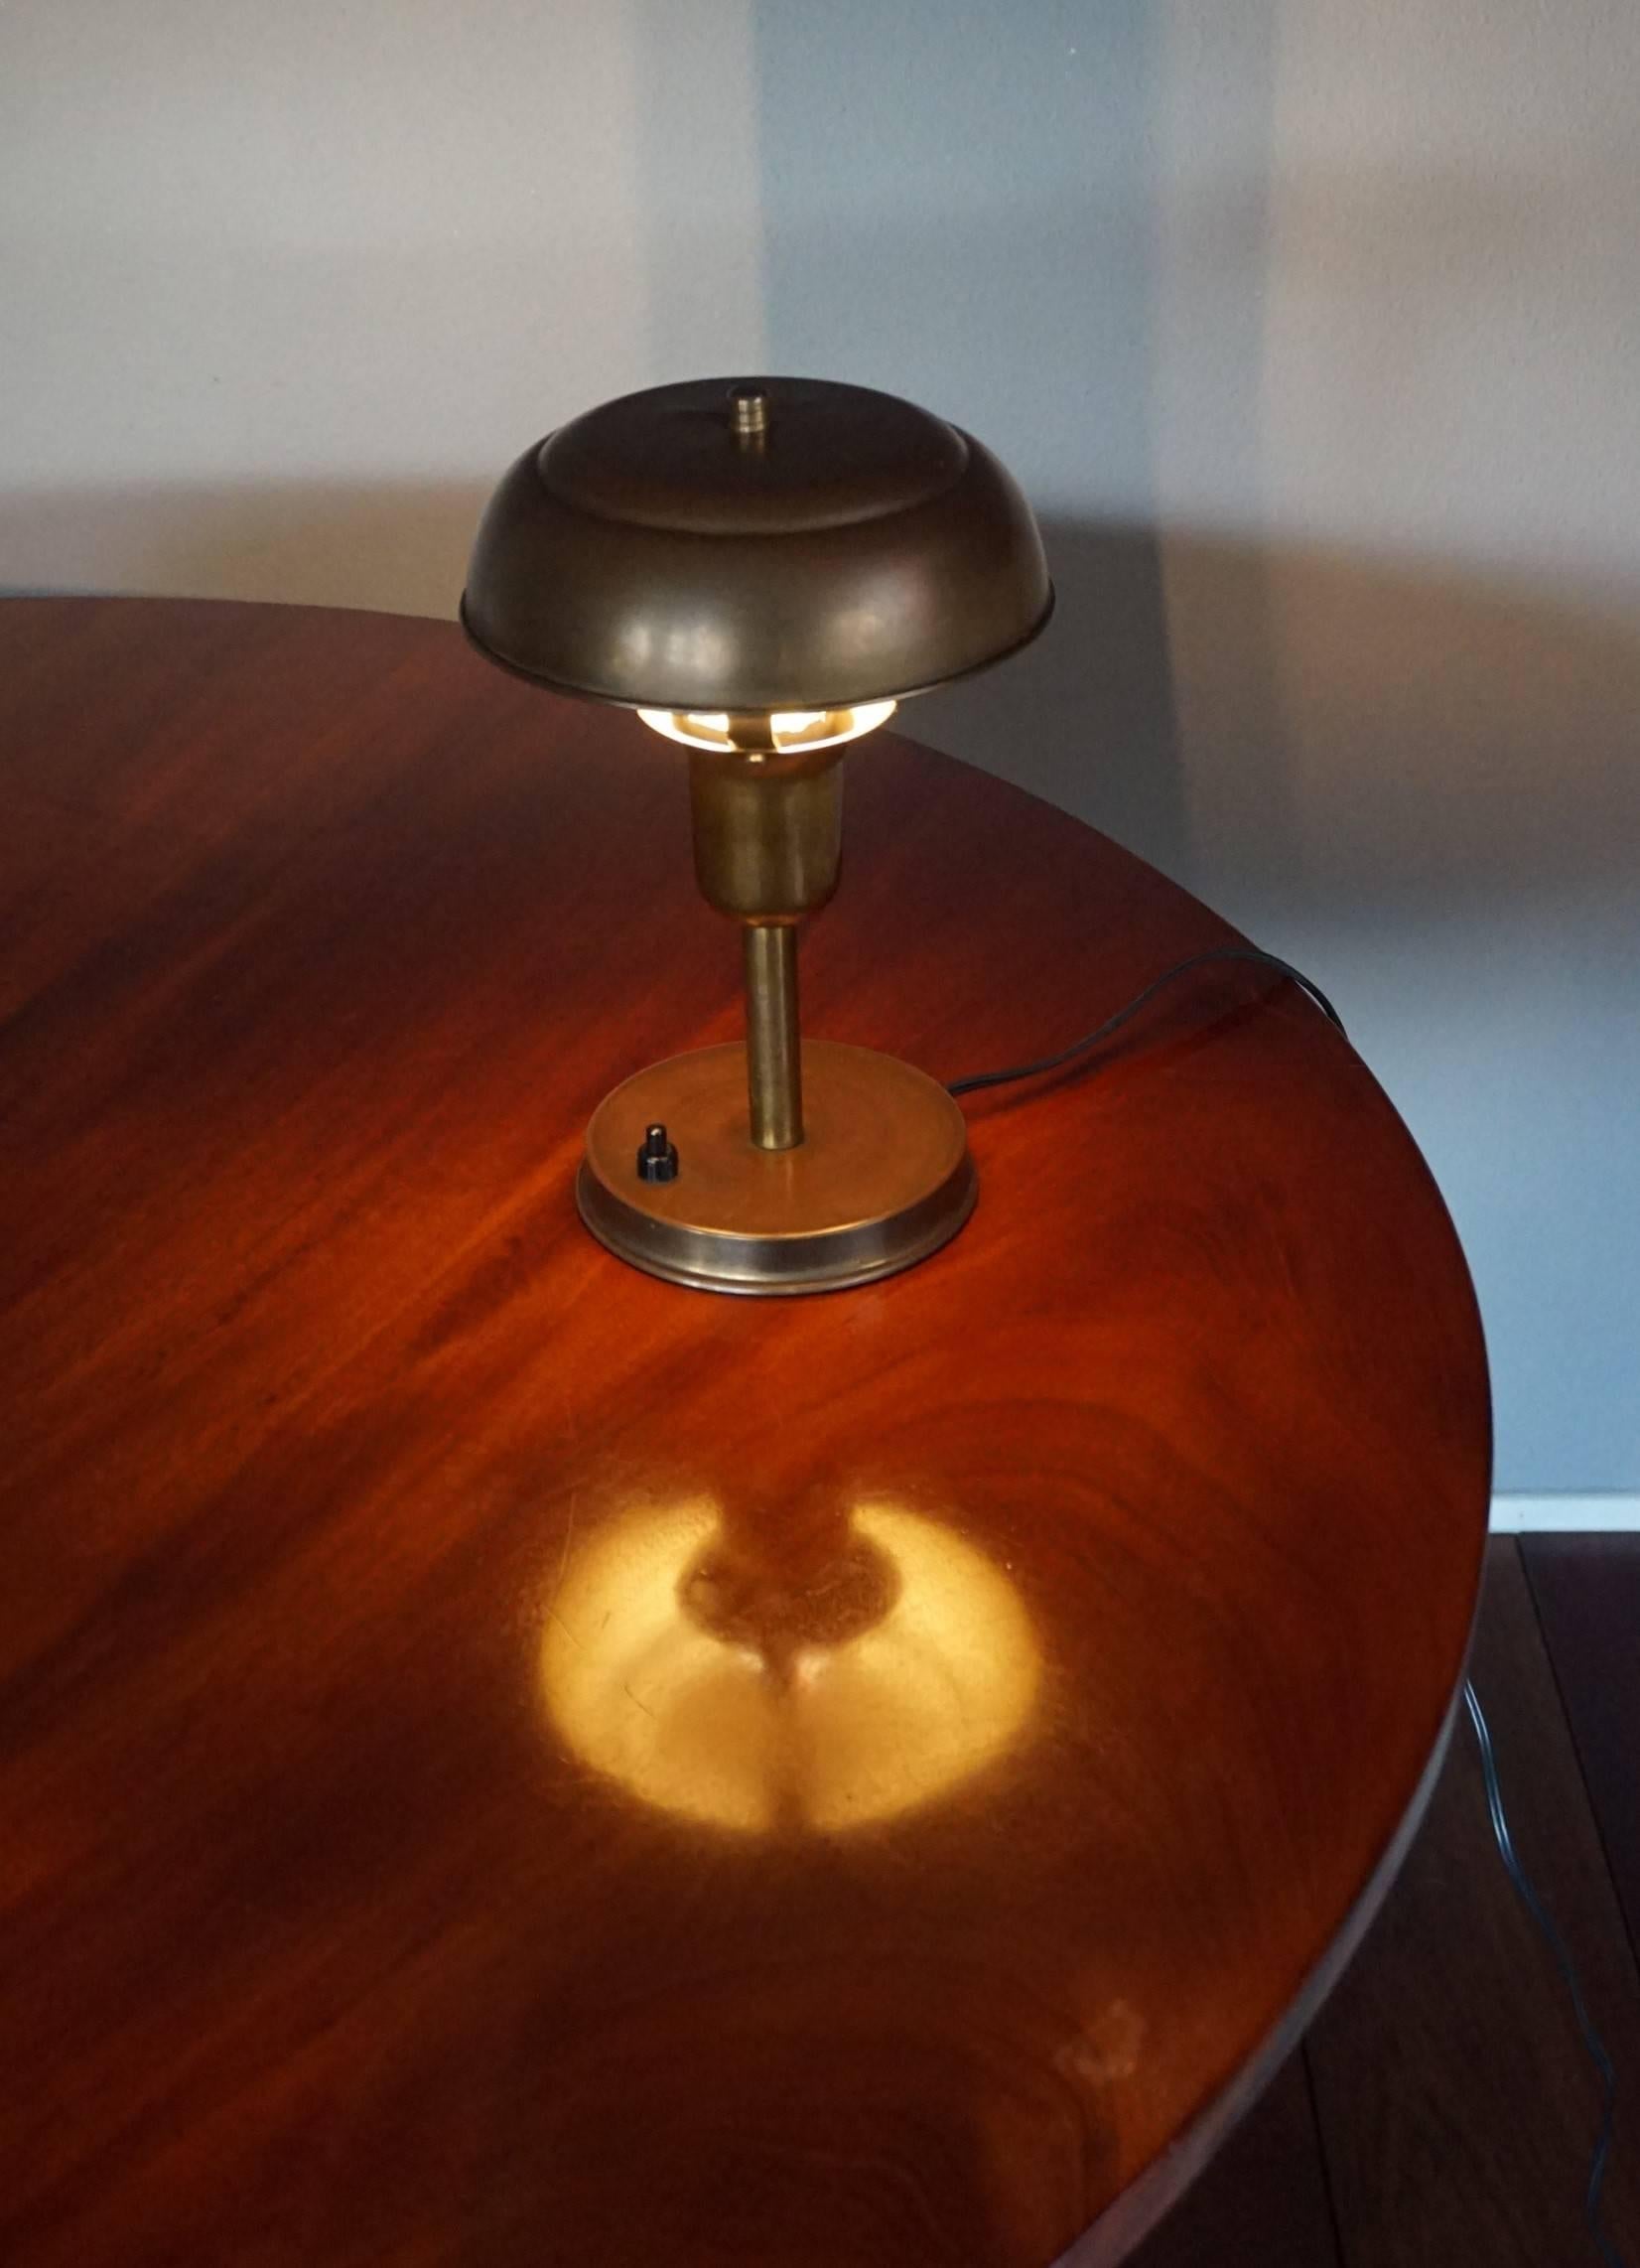 Practical size table lamp with a wonderful look and feel.

There is something about table lamps from the past that you just don't find in modern lamps. If you don't have the right eye than this particular Art Deco lamp might look 'simple'. However,